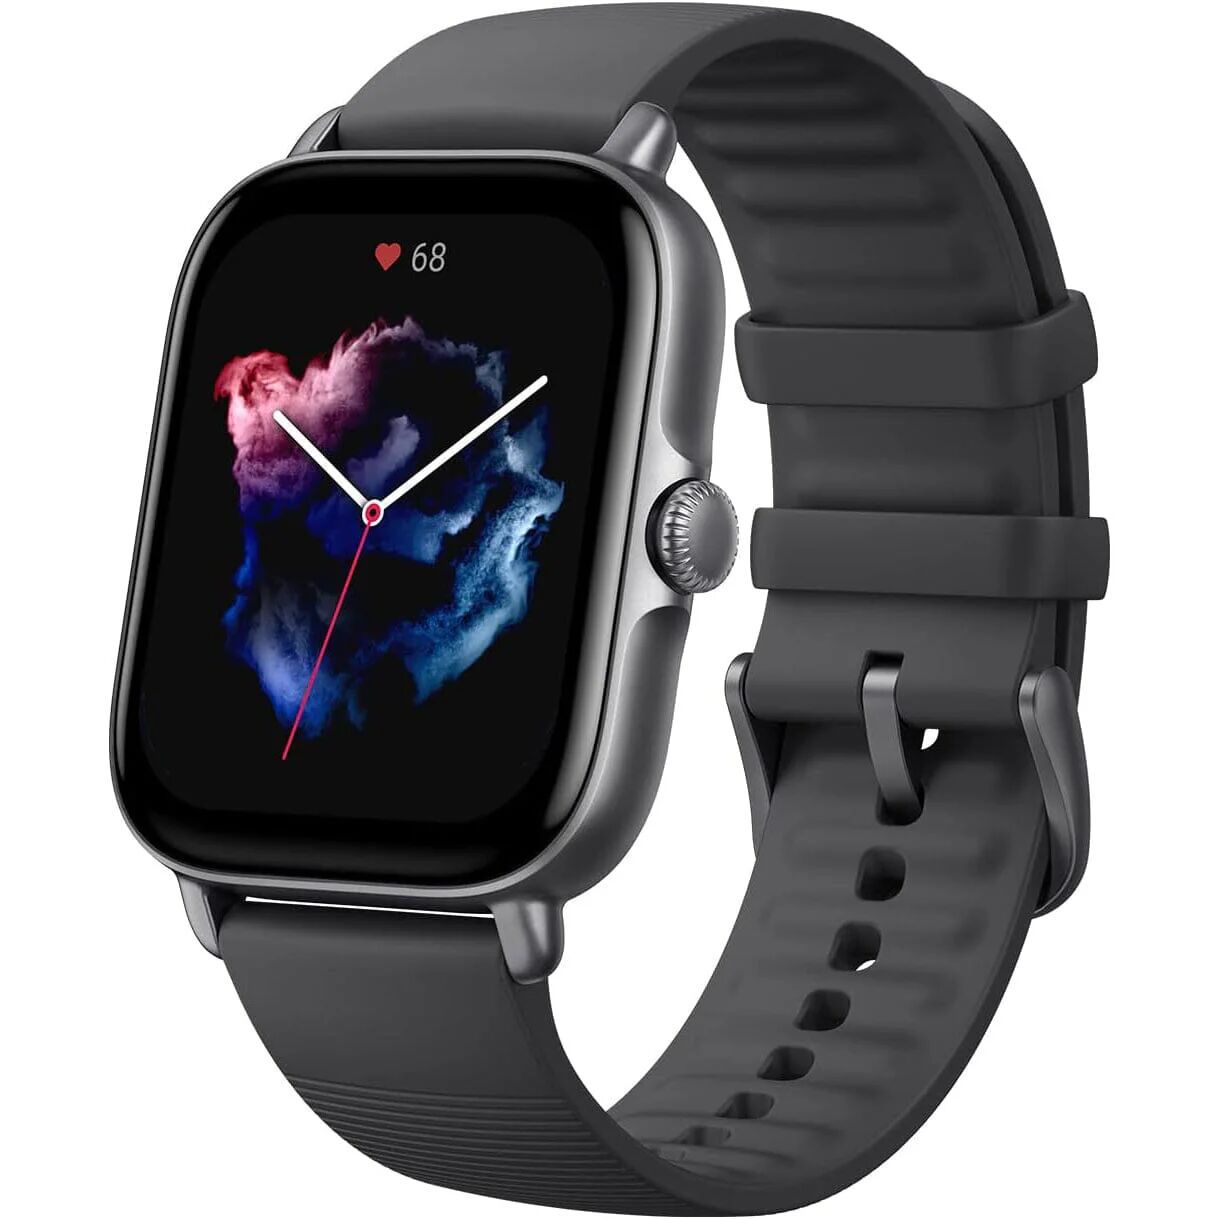 DailySale Amazfit GTS 3 Smart Watch for Android iPhone, Alexa Built-In (Refurbished)